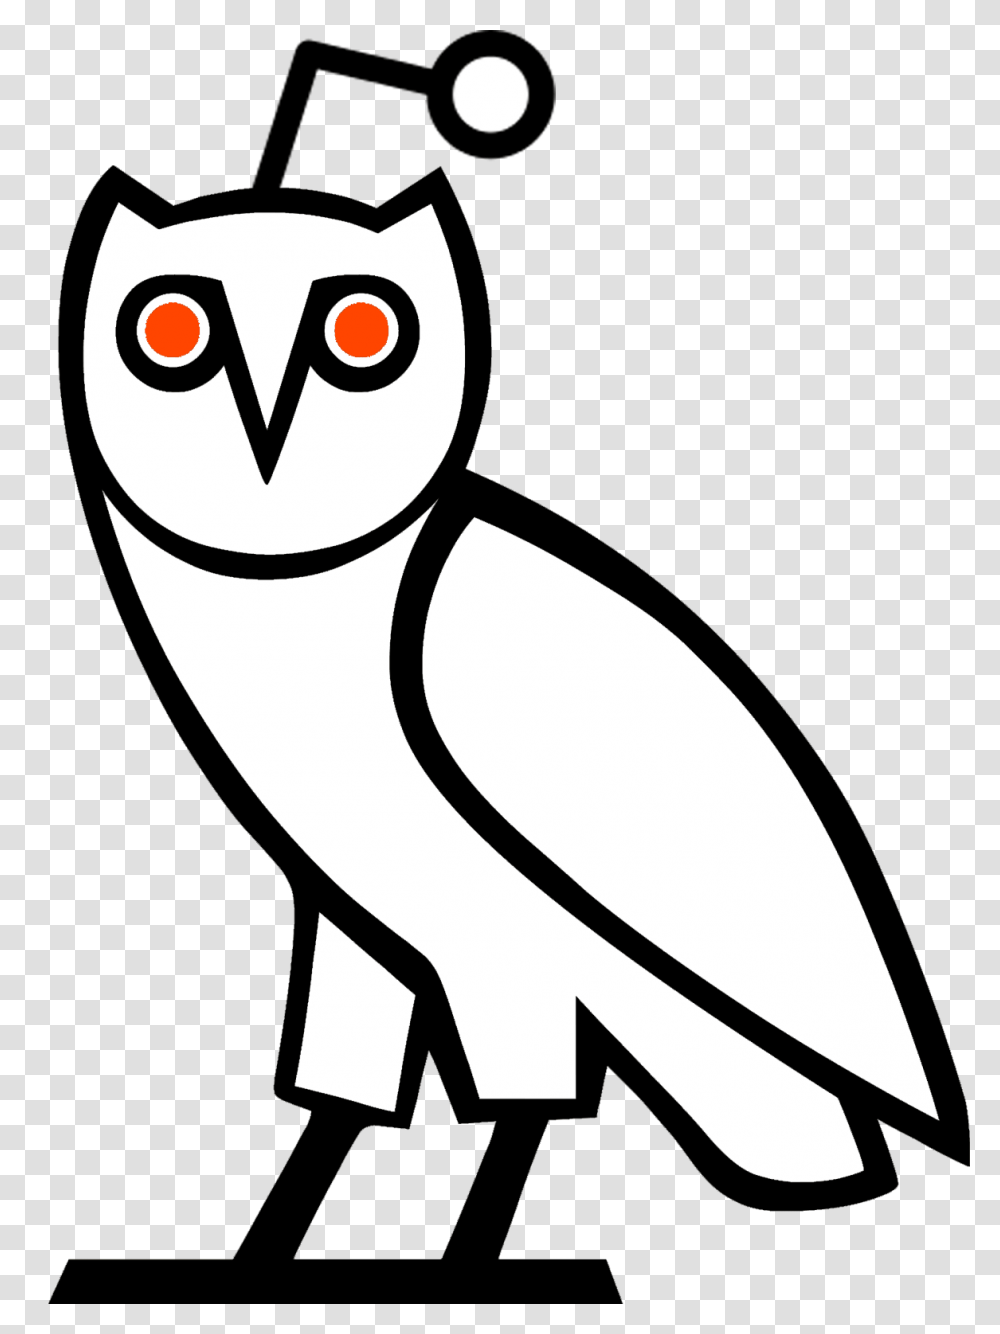 I Made A Rdrizzy Reddit Snoo Drizzy, Animal, Bird, Penguin, Owl Transparent Png